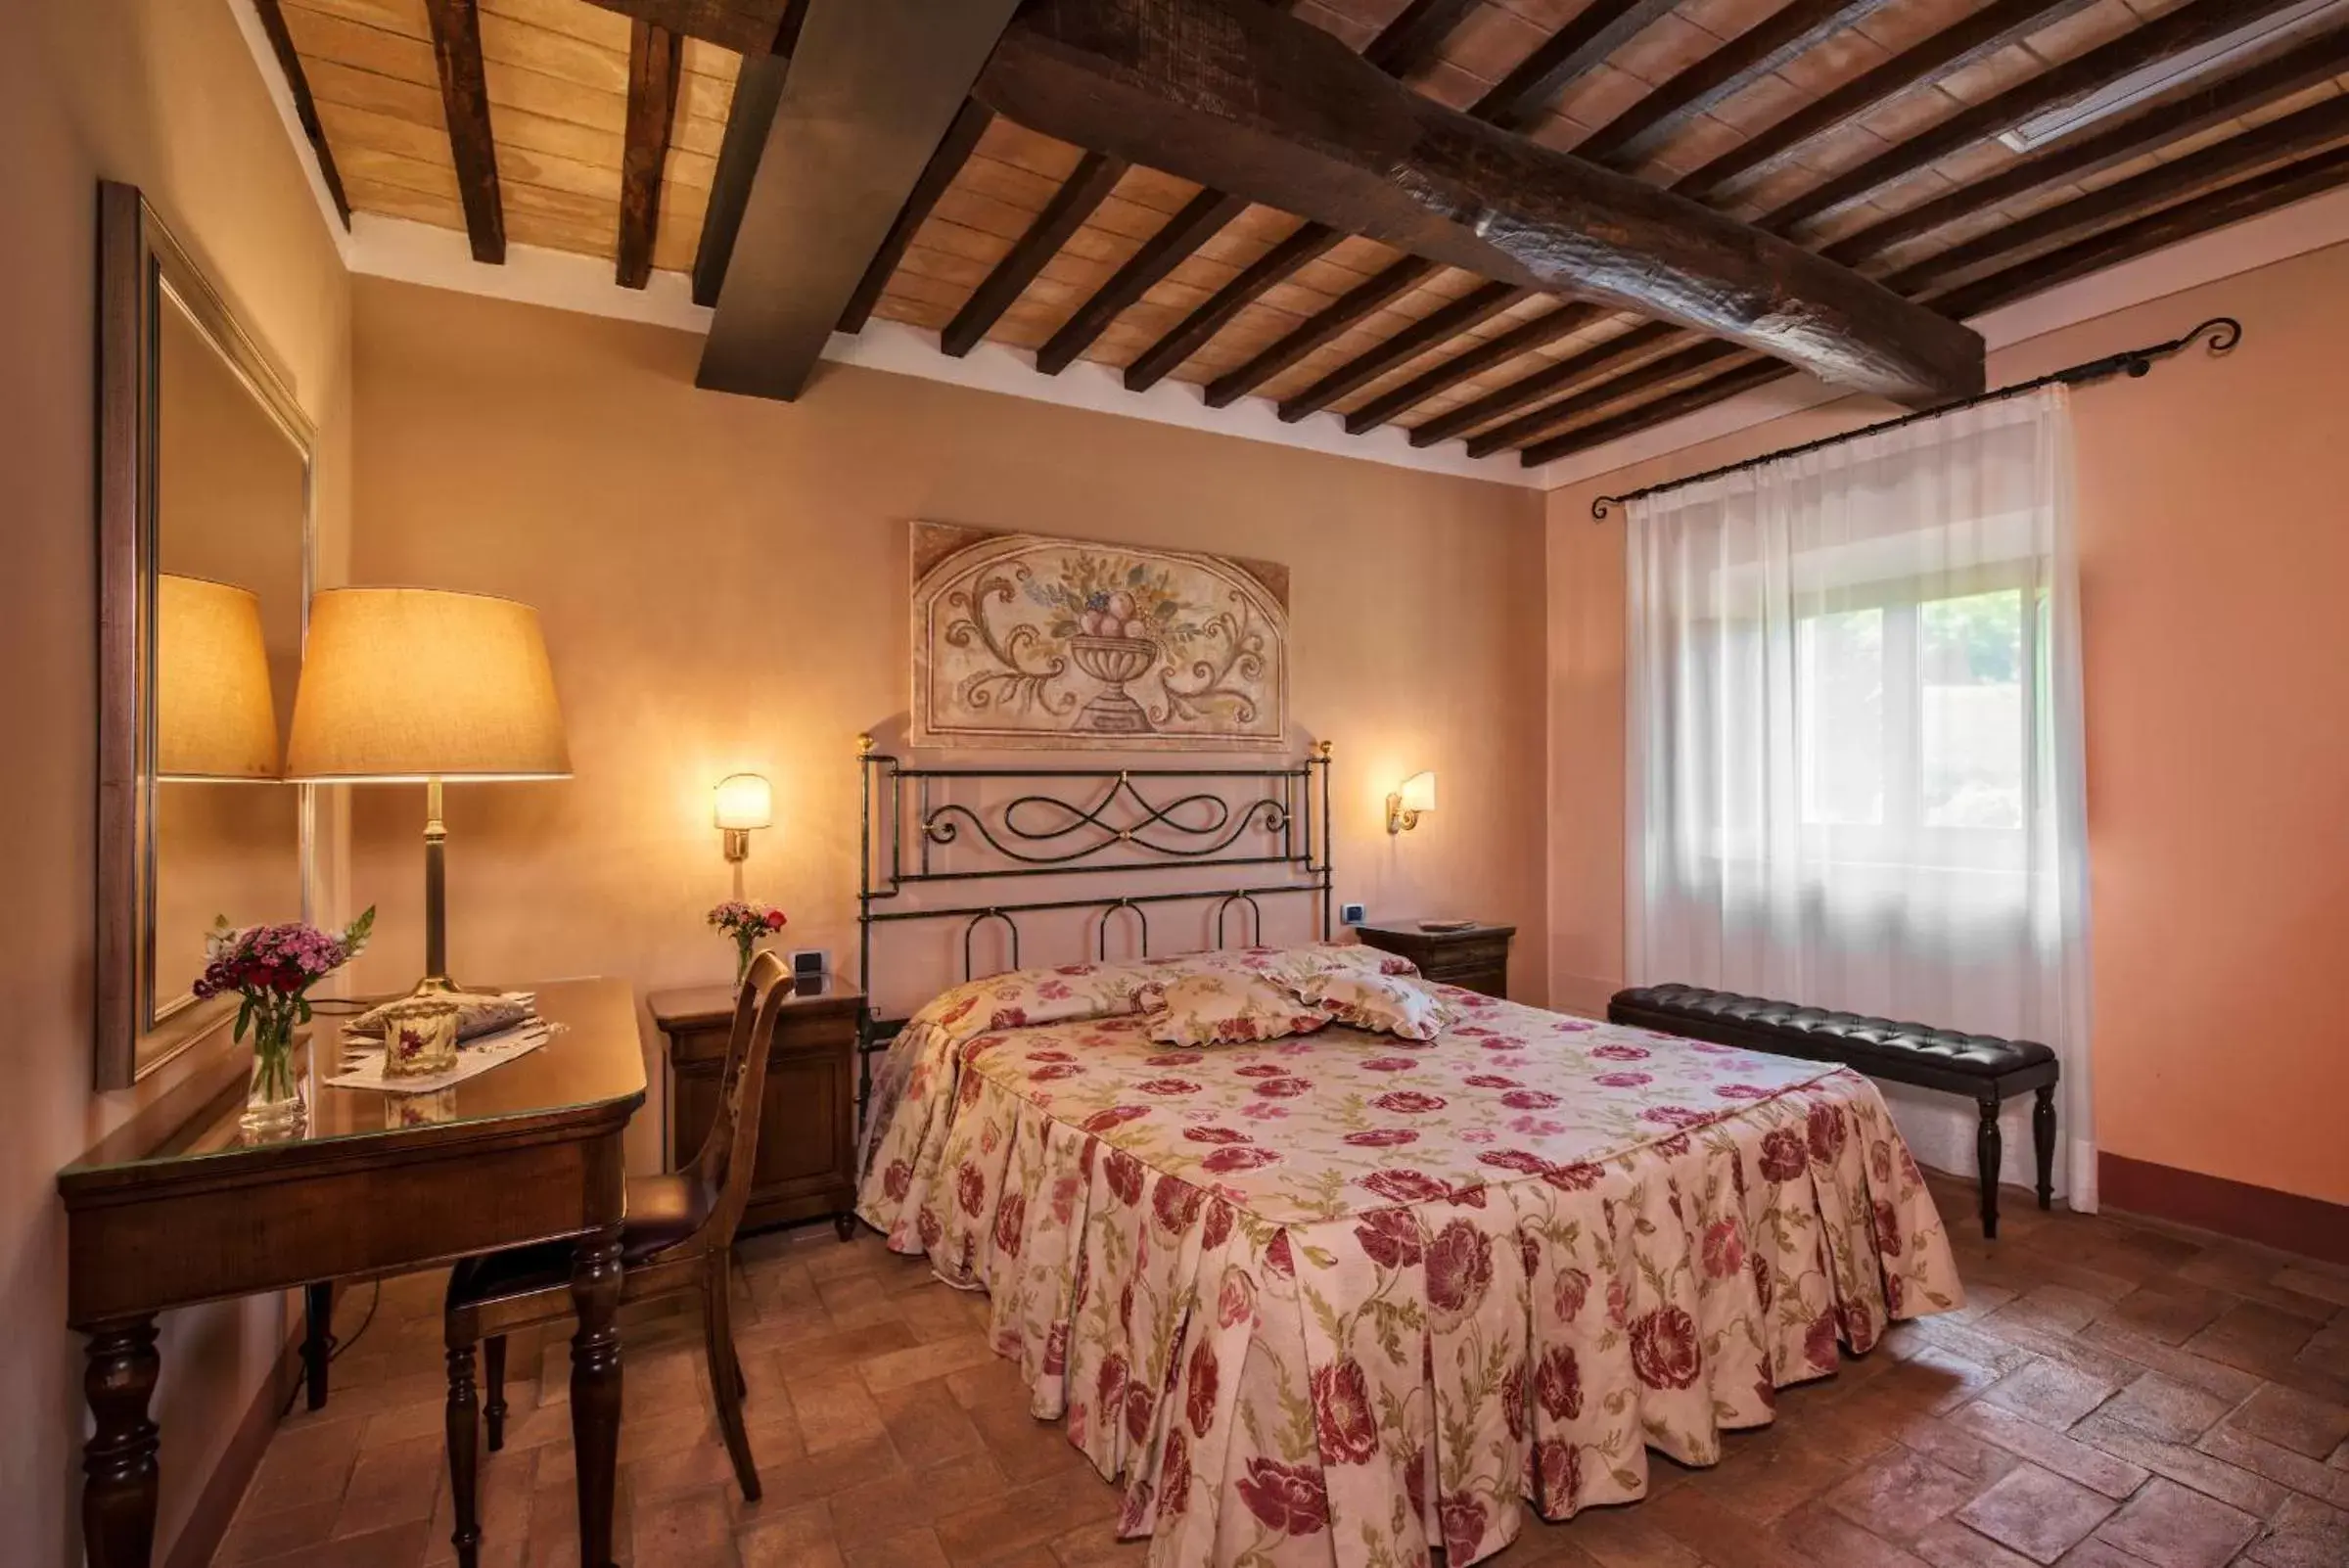 Bed, Room Photo in Relais Osteria Dell'Orcia